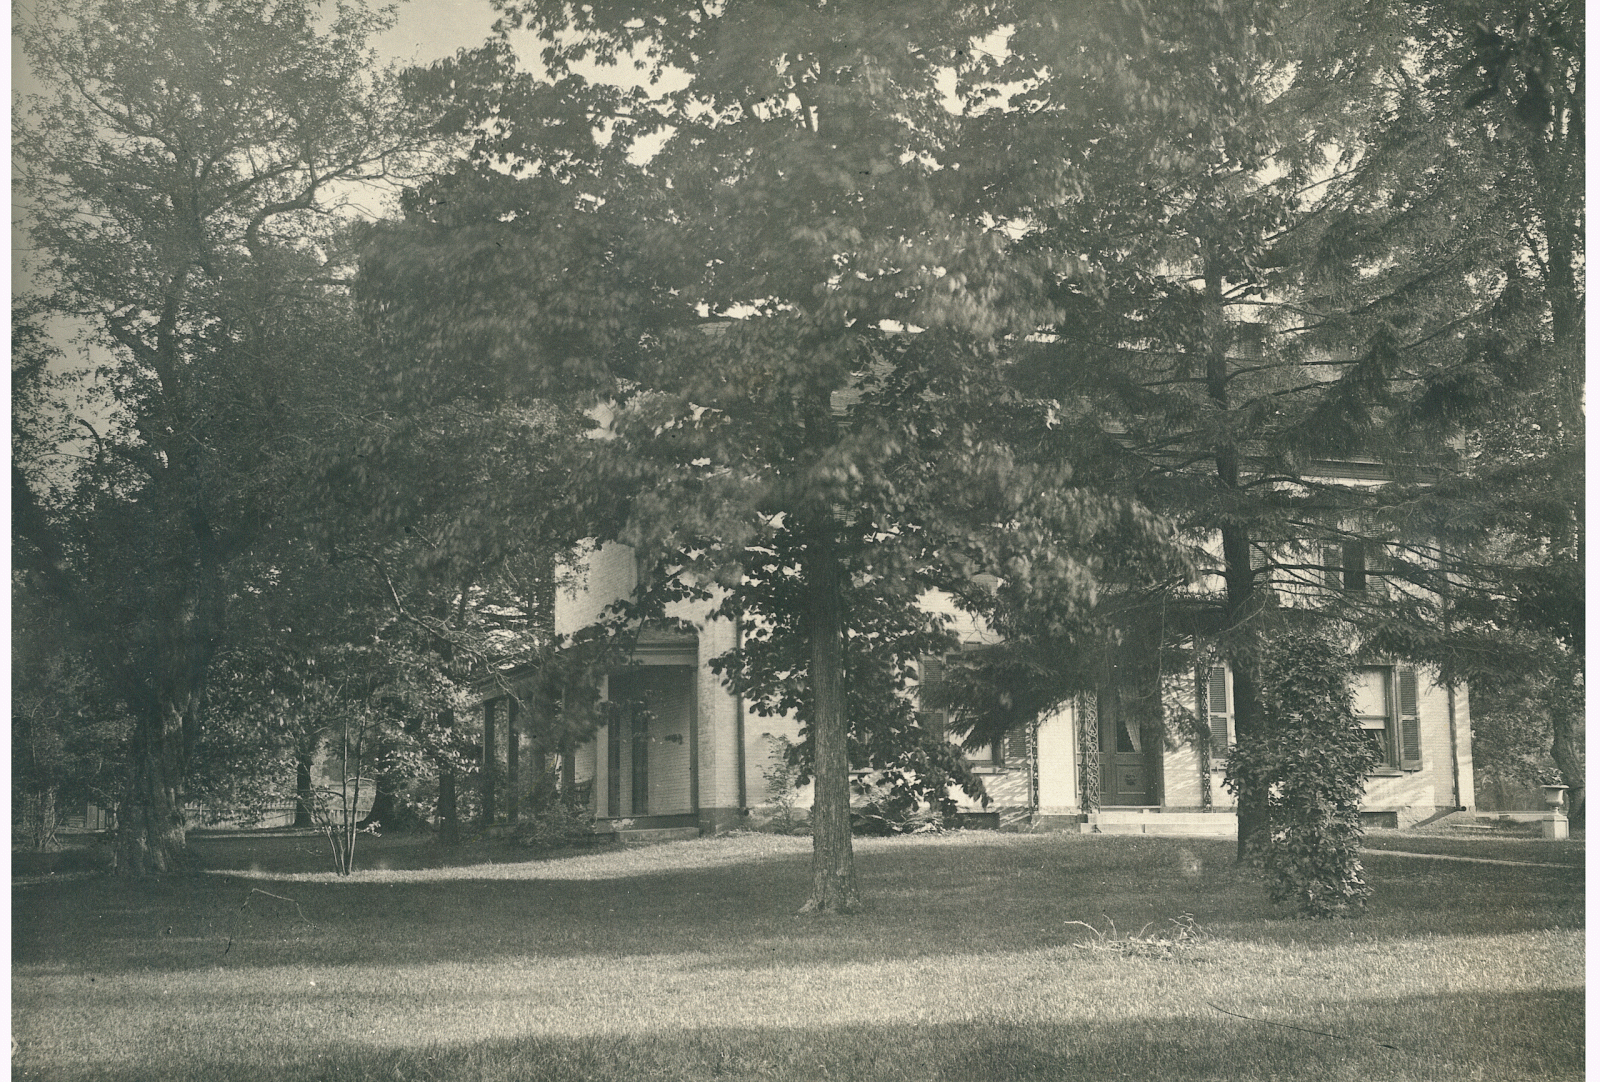 Elston Homestead ca. 1900 when the front door opened onto Main Street, prior to the remodeling by Henry Wallace